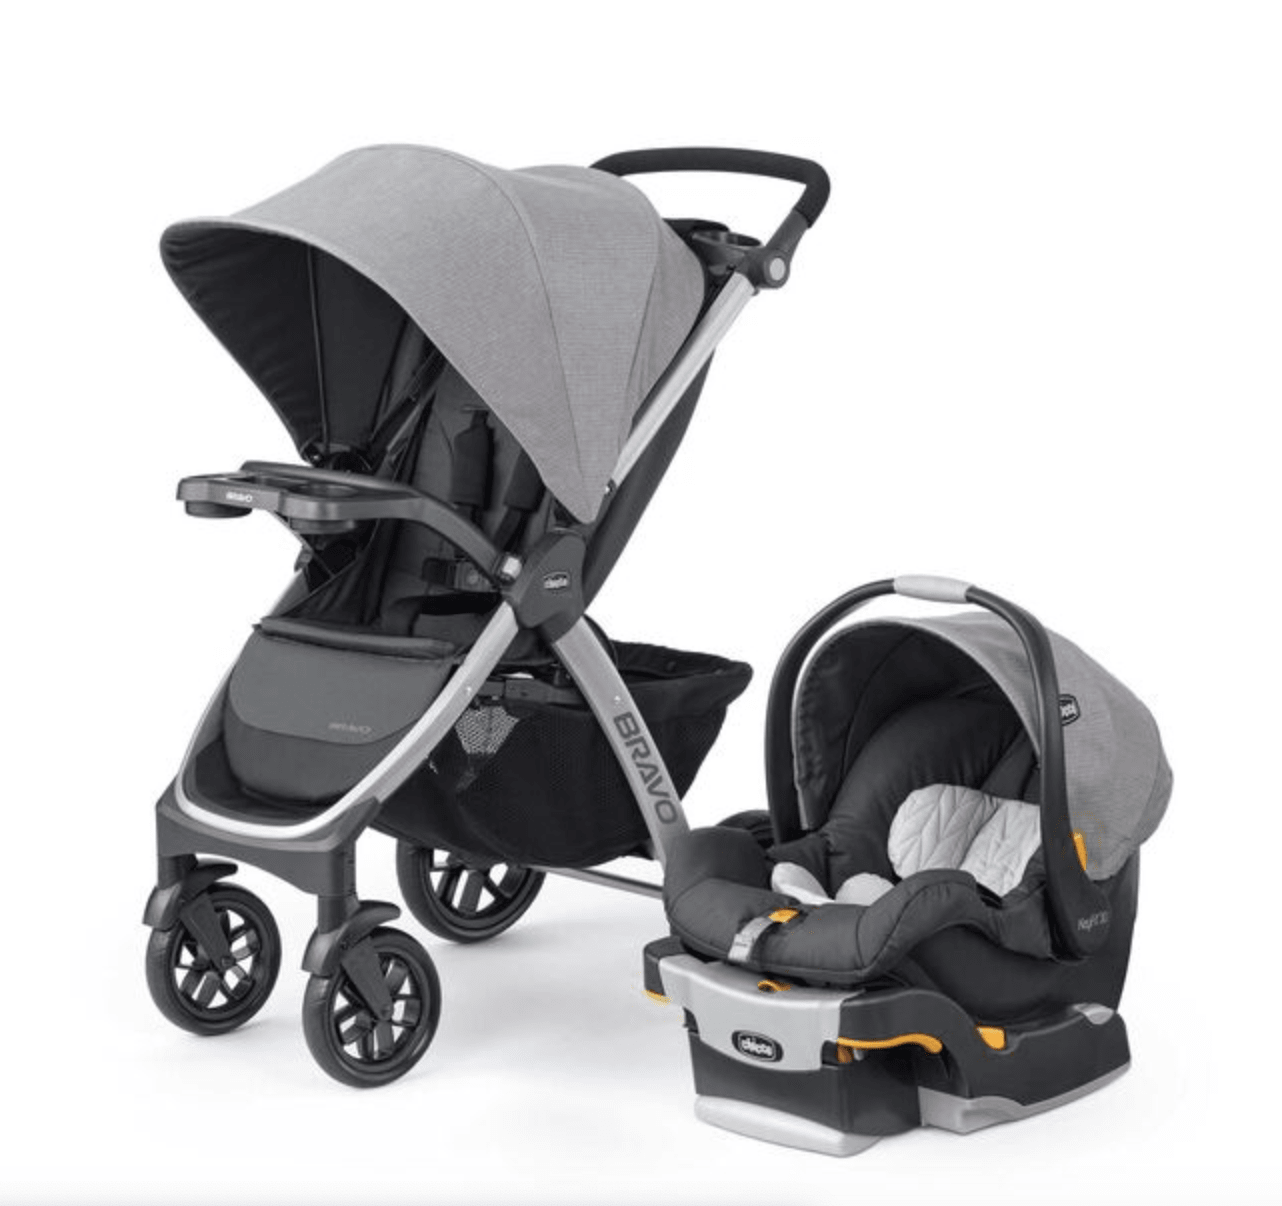 12 Best Strollers Of 2021 Chicco Nuna, Best Car Seats And Strollers 2021